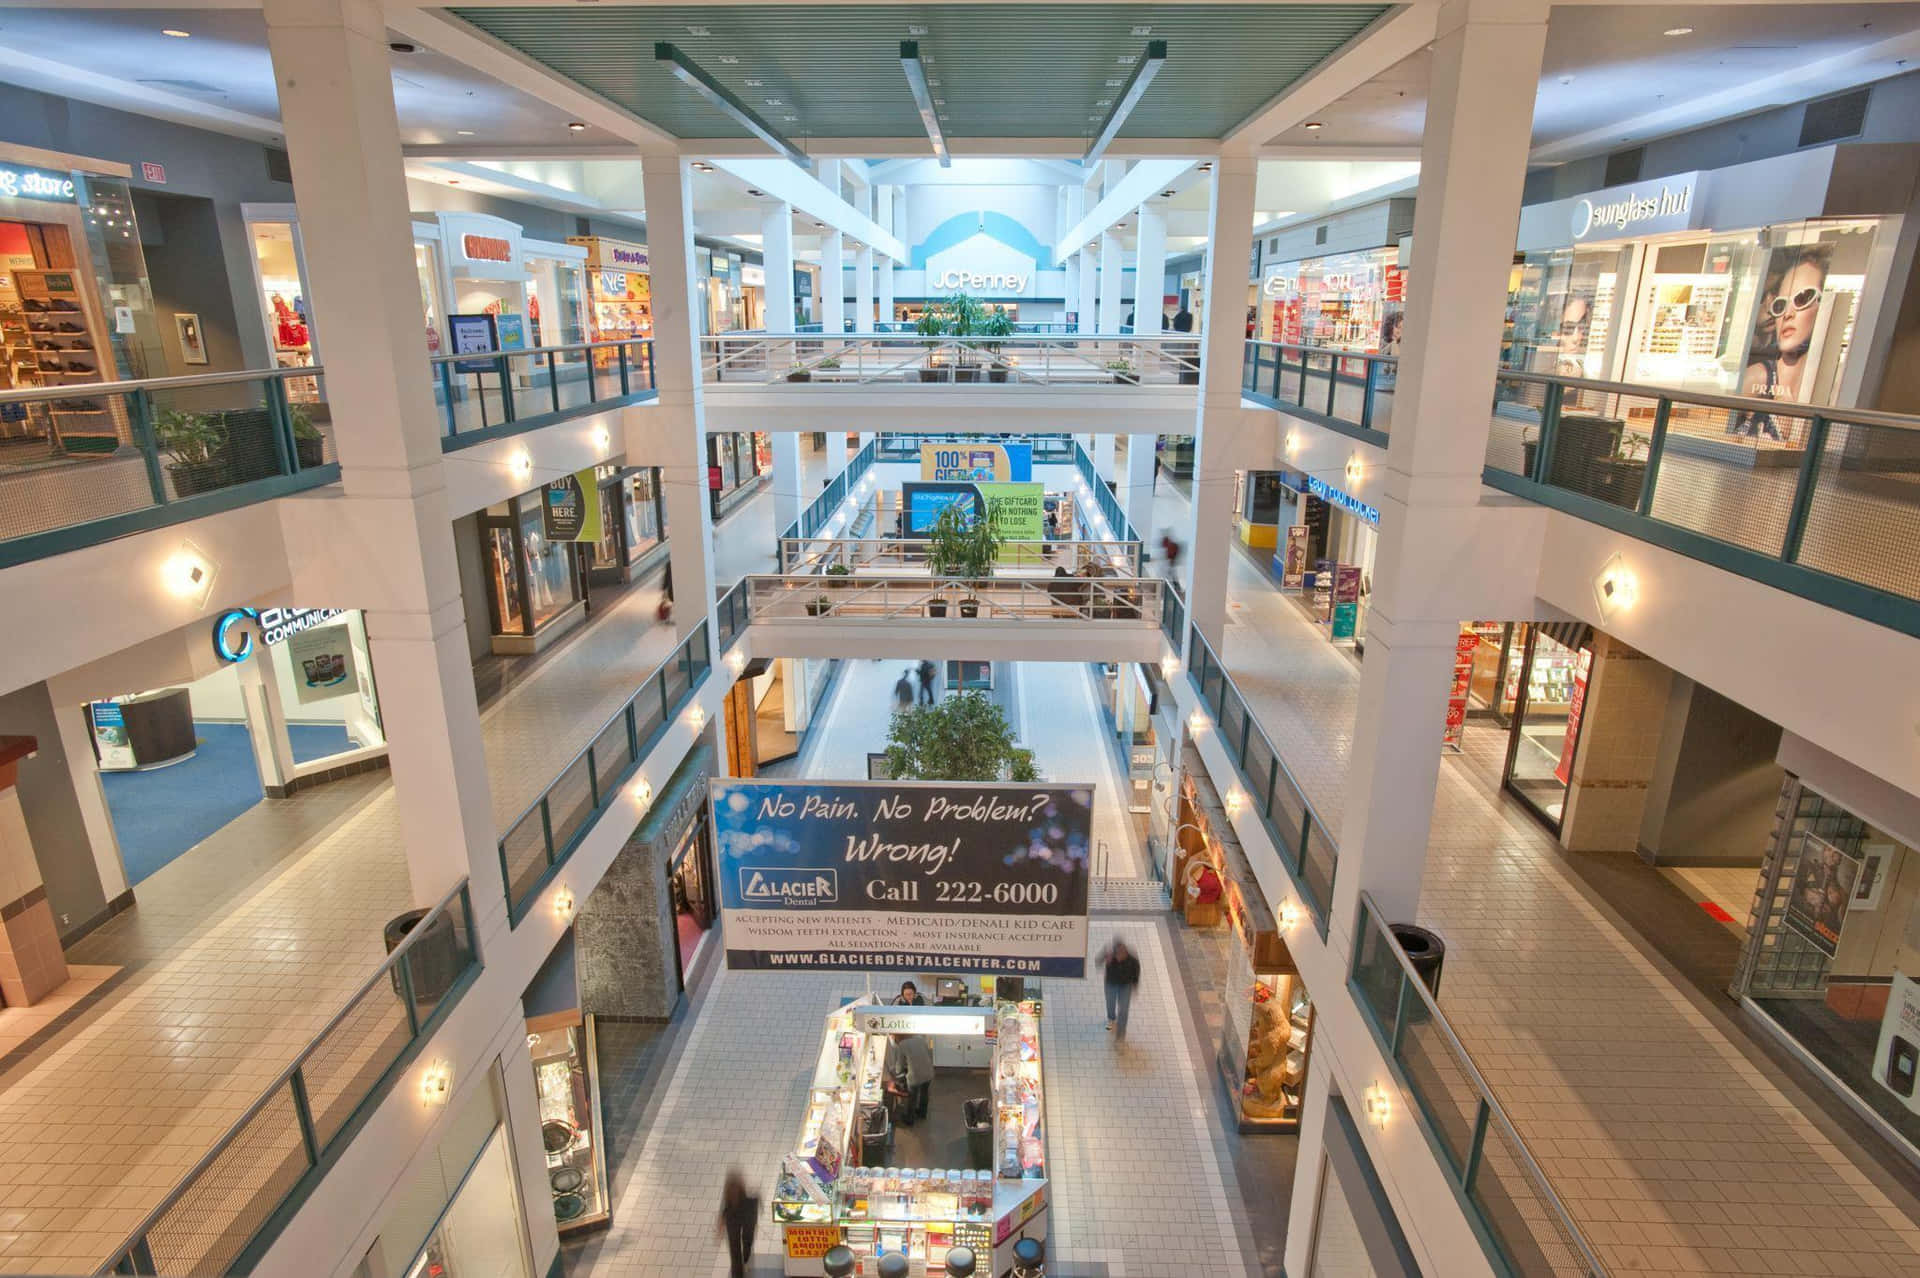 Enjoy the vibrant atmosphere of the modern shopping mall.